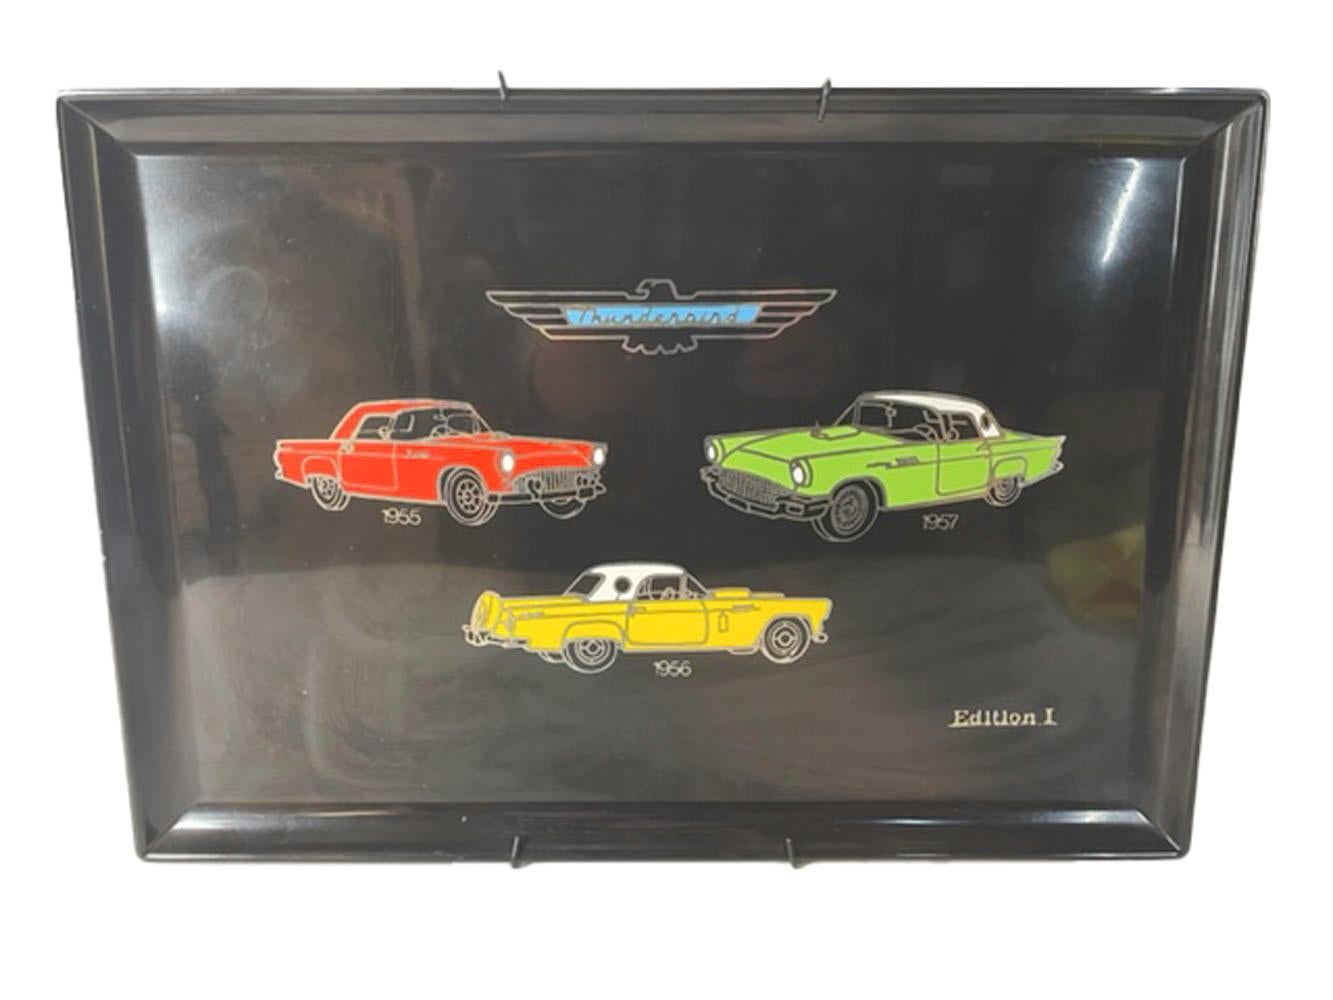 Vintage Couroc phenolic resin tray with inlaid chrome and resin images of classic Ford Thunderbirds from 1955, '56 & '57 made for and retailed by Classics & Specialties of Metairie, LA. This example retains its original display hanger as well as